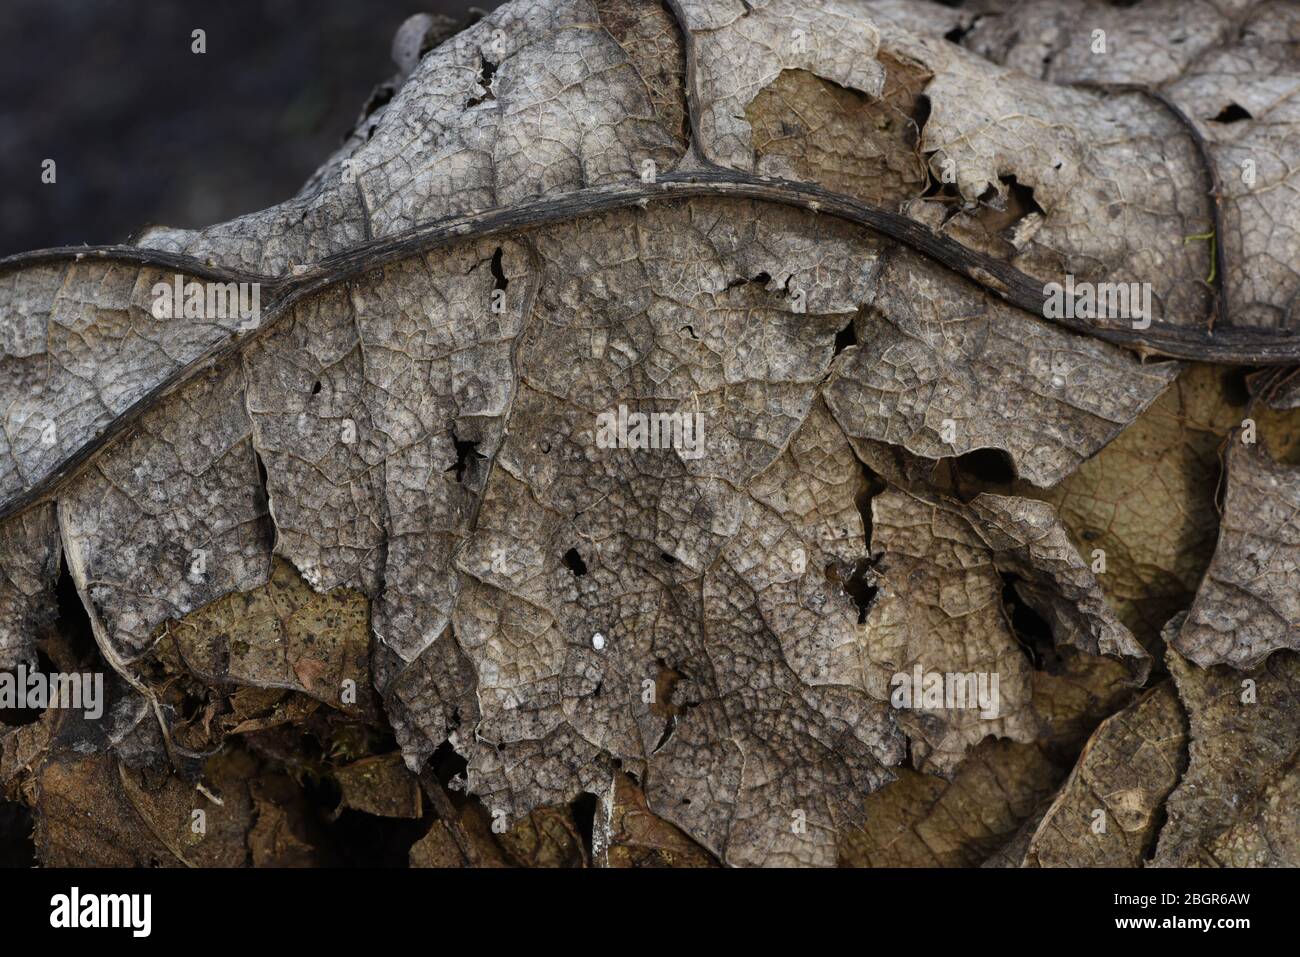 A macro close up view of dead, dried and decaying leaves with a look at the veins on the surface Stock Photo